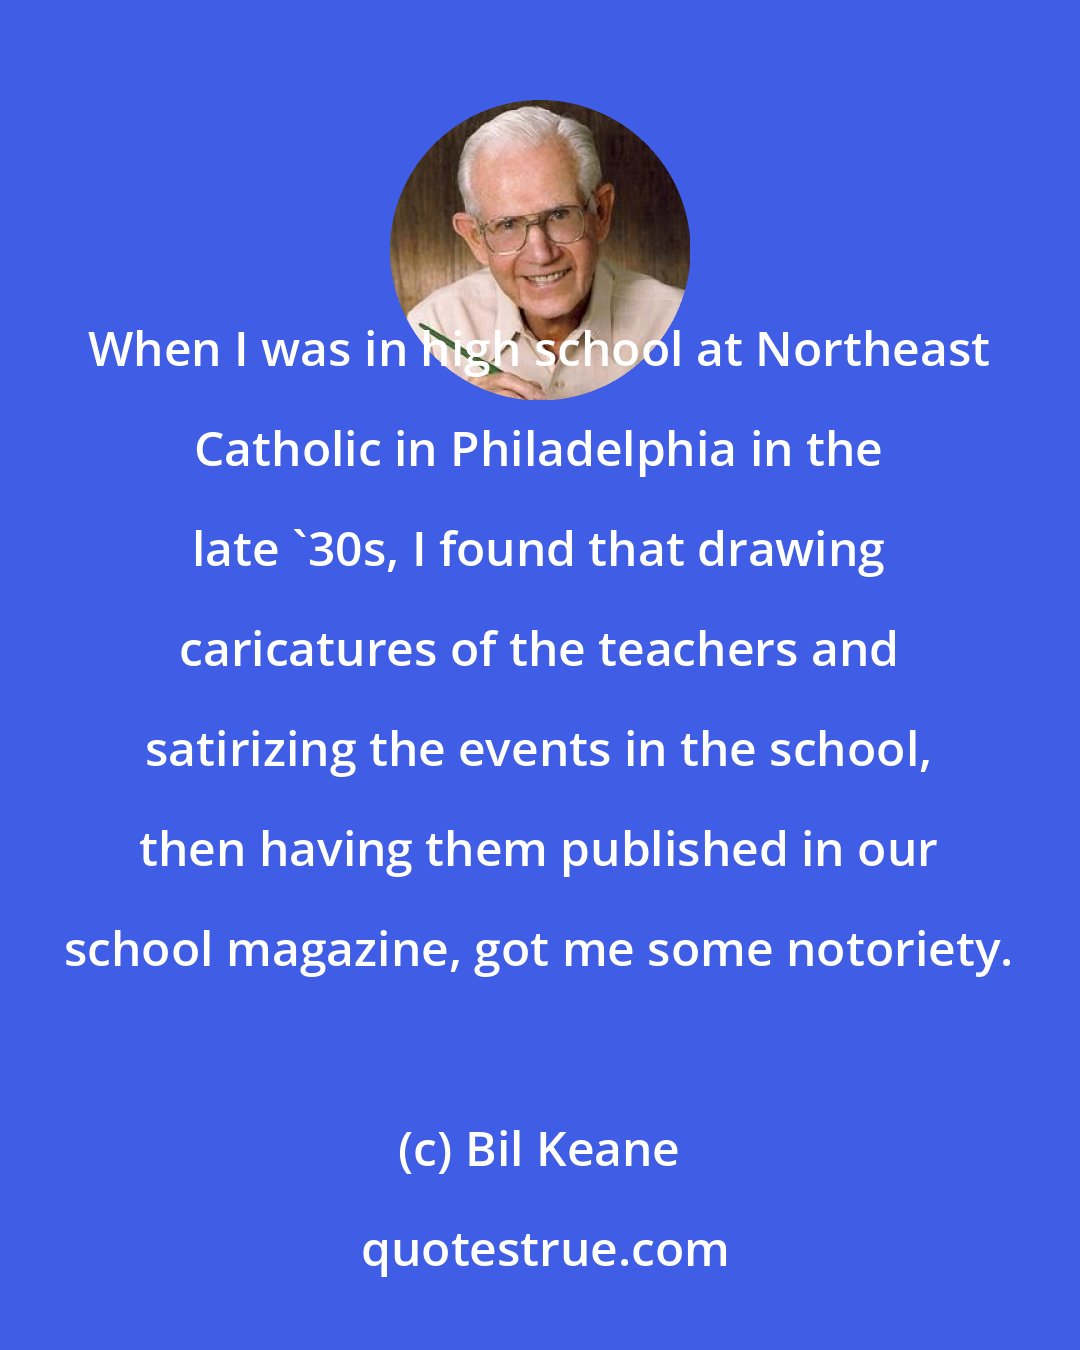 Bil Keane: When I was in high school at Northeast Catholic in Philadelphia in the late '30s, I found that drawing caricatures of the teachers and satirizing the events in the school, then having them published in our school magazine, got me some notoriety.